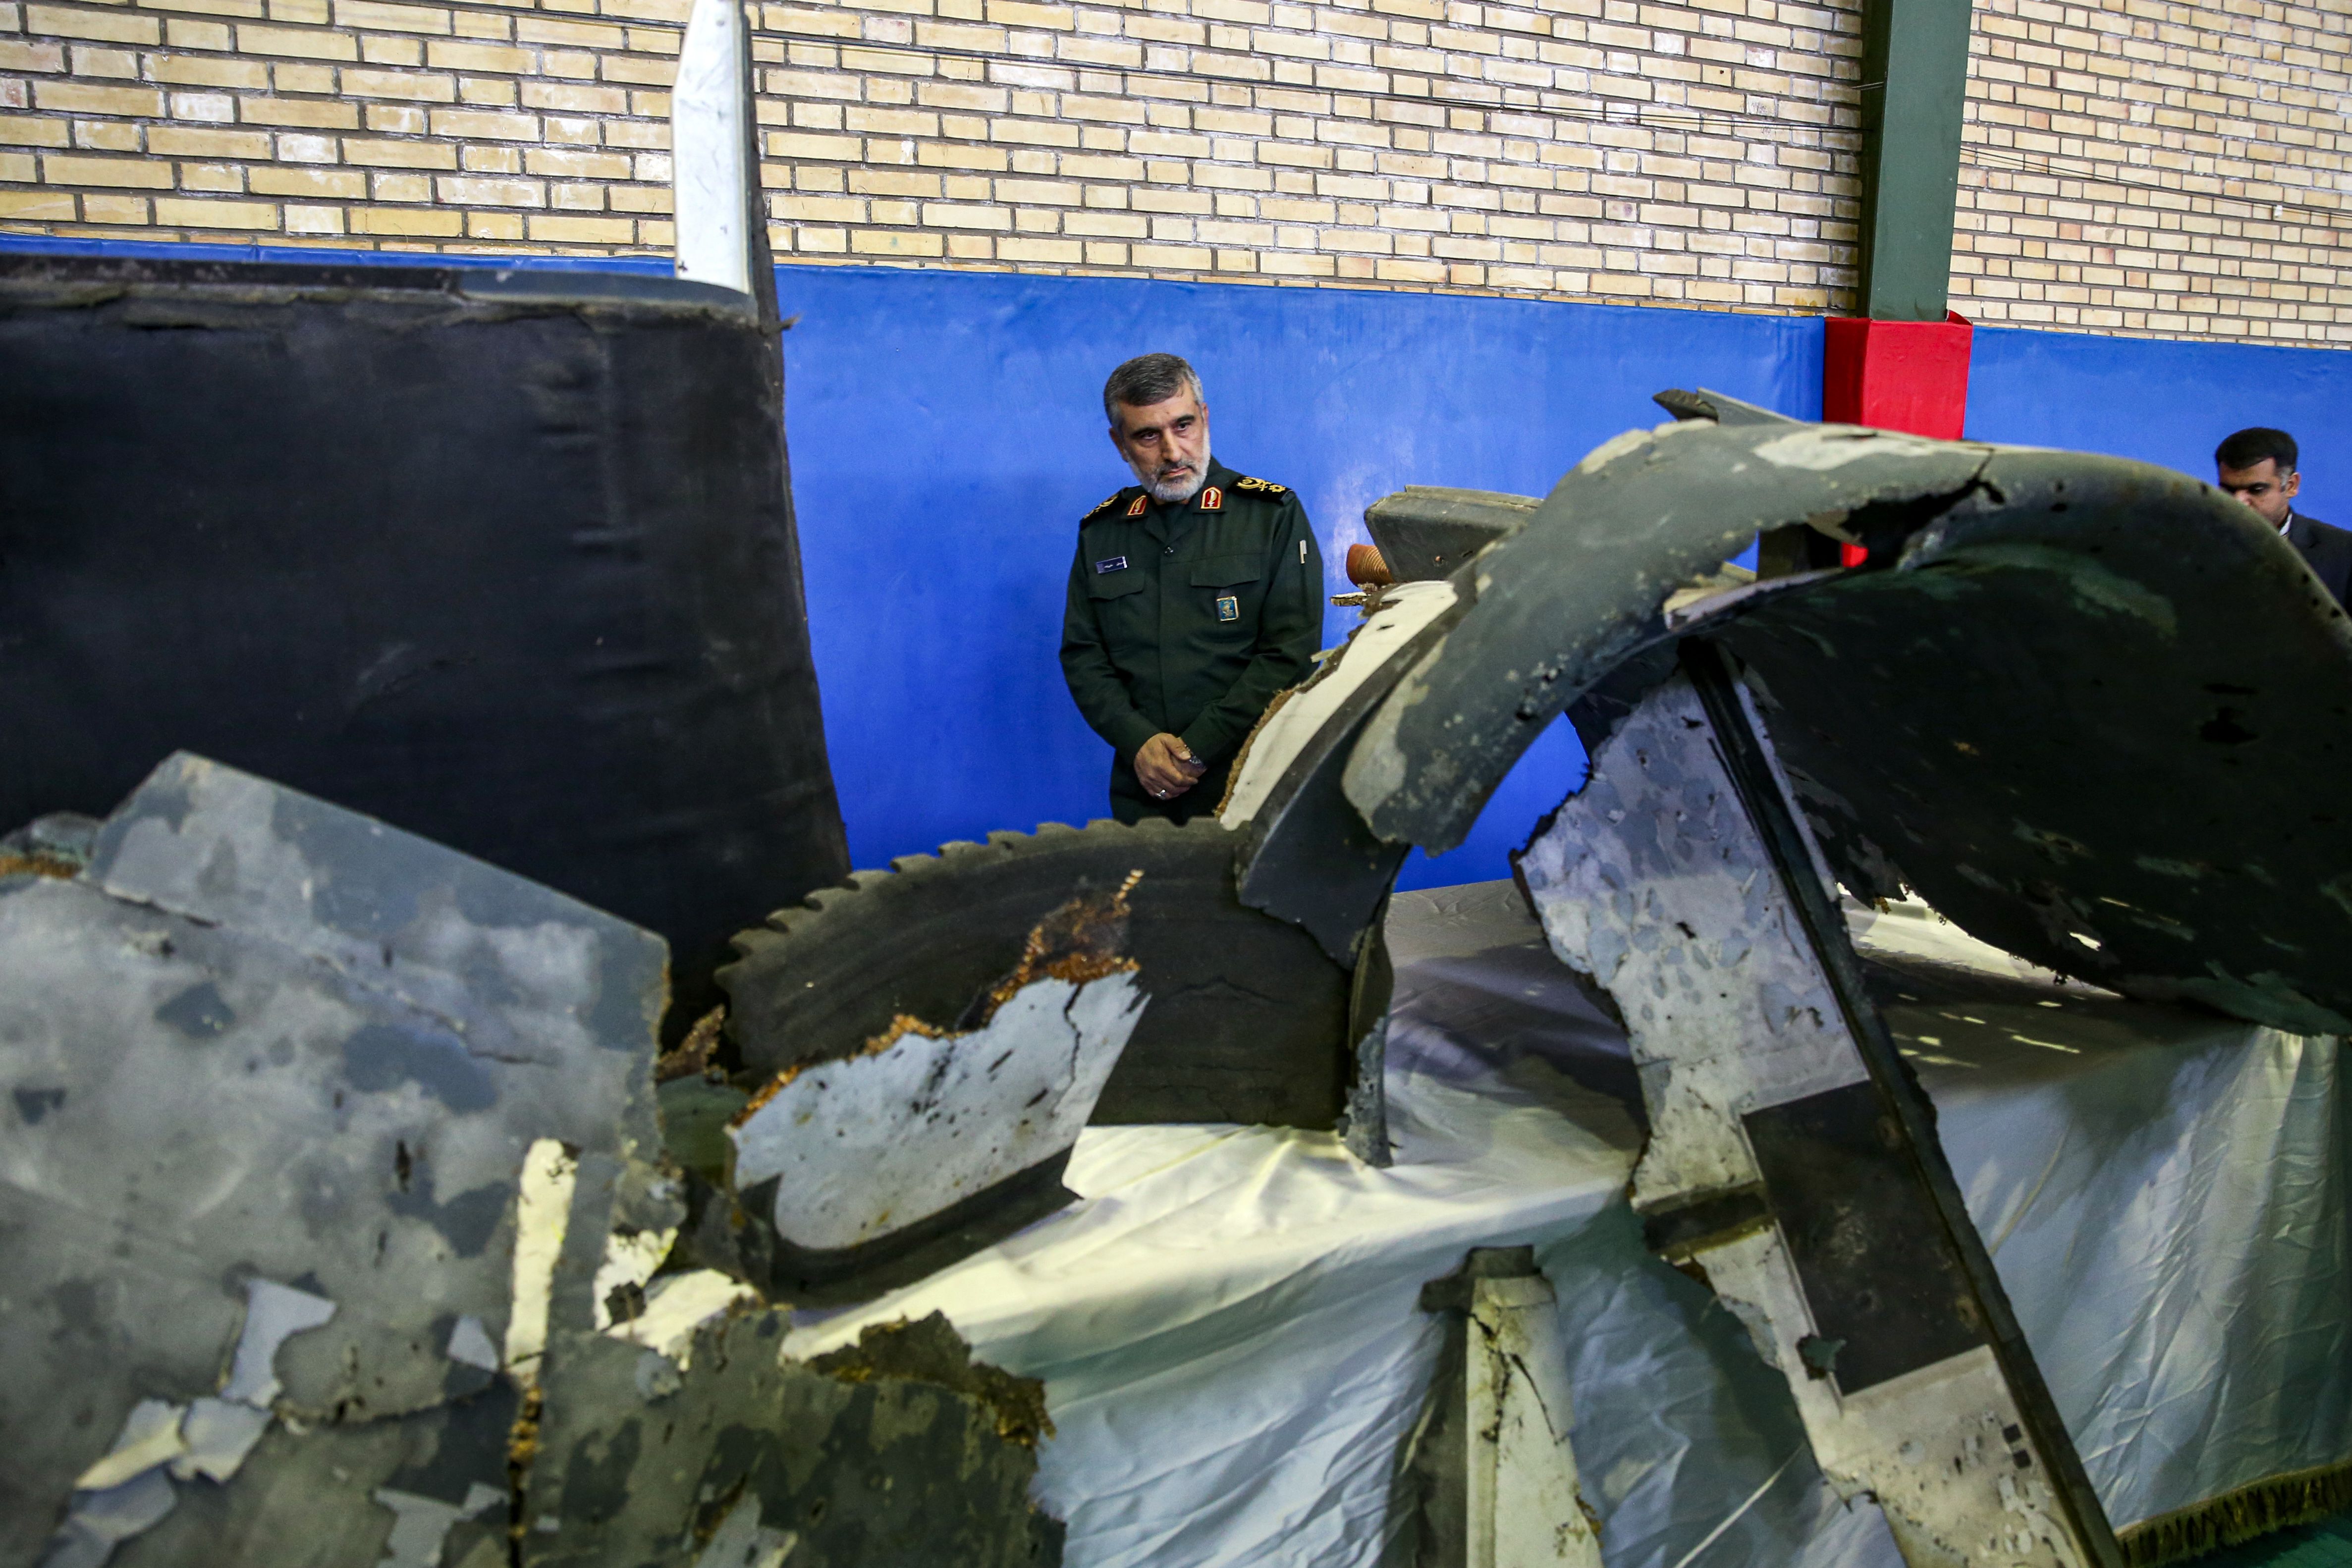 General Amir Ali Hajizadeh (C), Iran's Head of the Revolutionary Guard's aerospace division, looks at debris from a downed US drone reportedly recovered within Iran's territorial waters and put on display by the Revolutionary Guard in the capital Tehran on June 21, 2019.